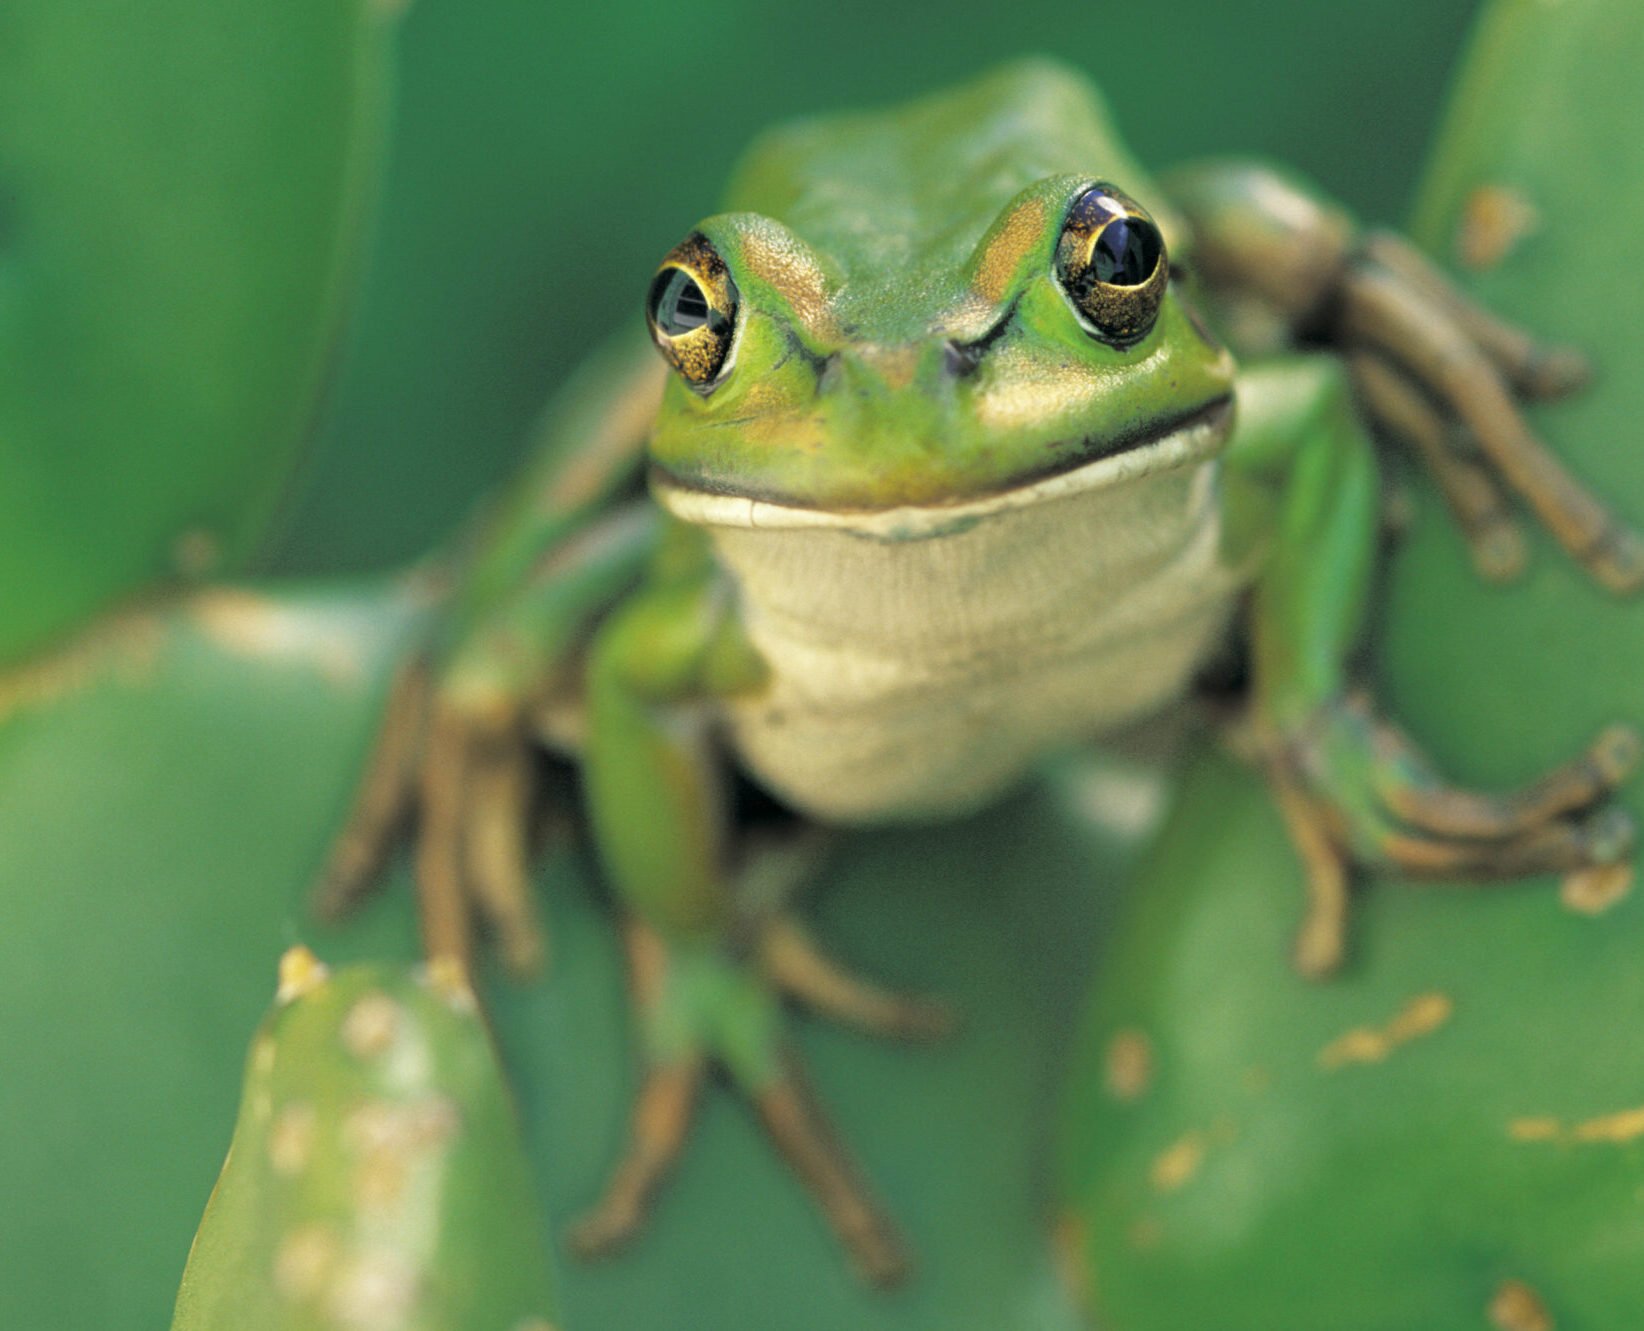 Image for article: Are pesticides to blame for recent mass deaths of frogs?